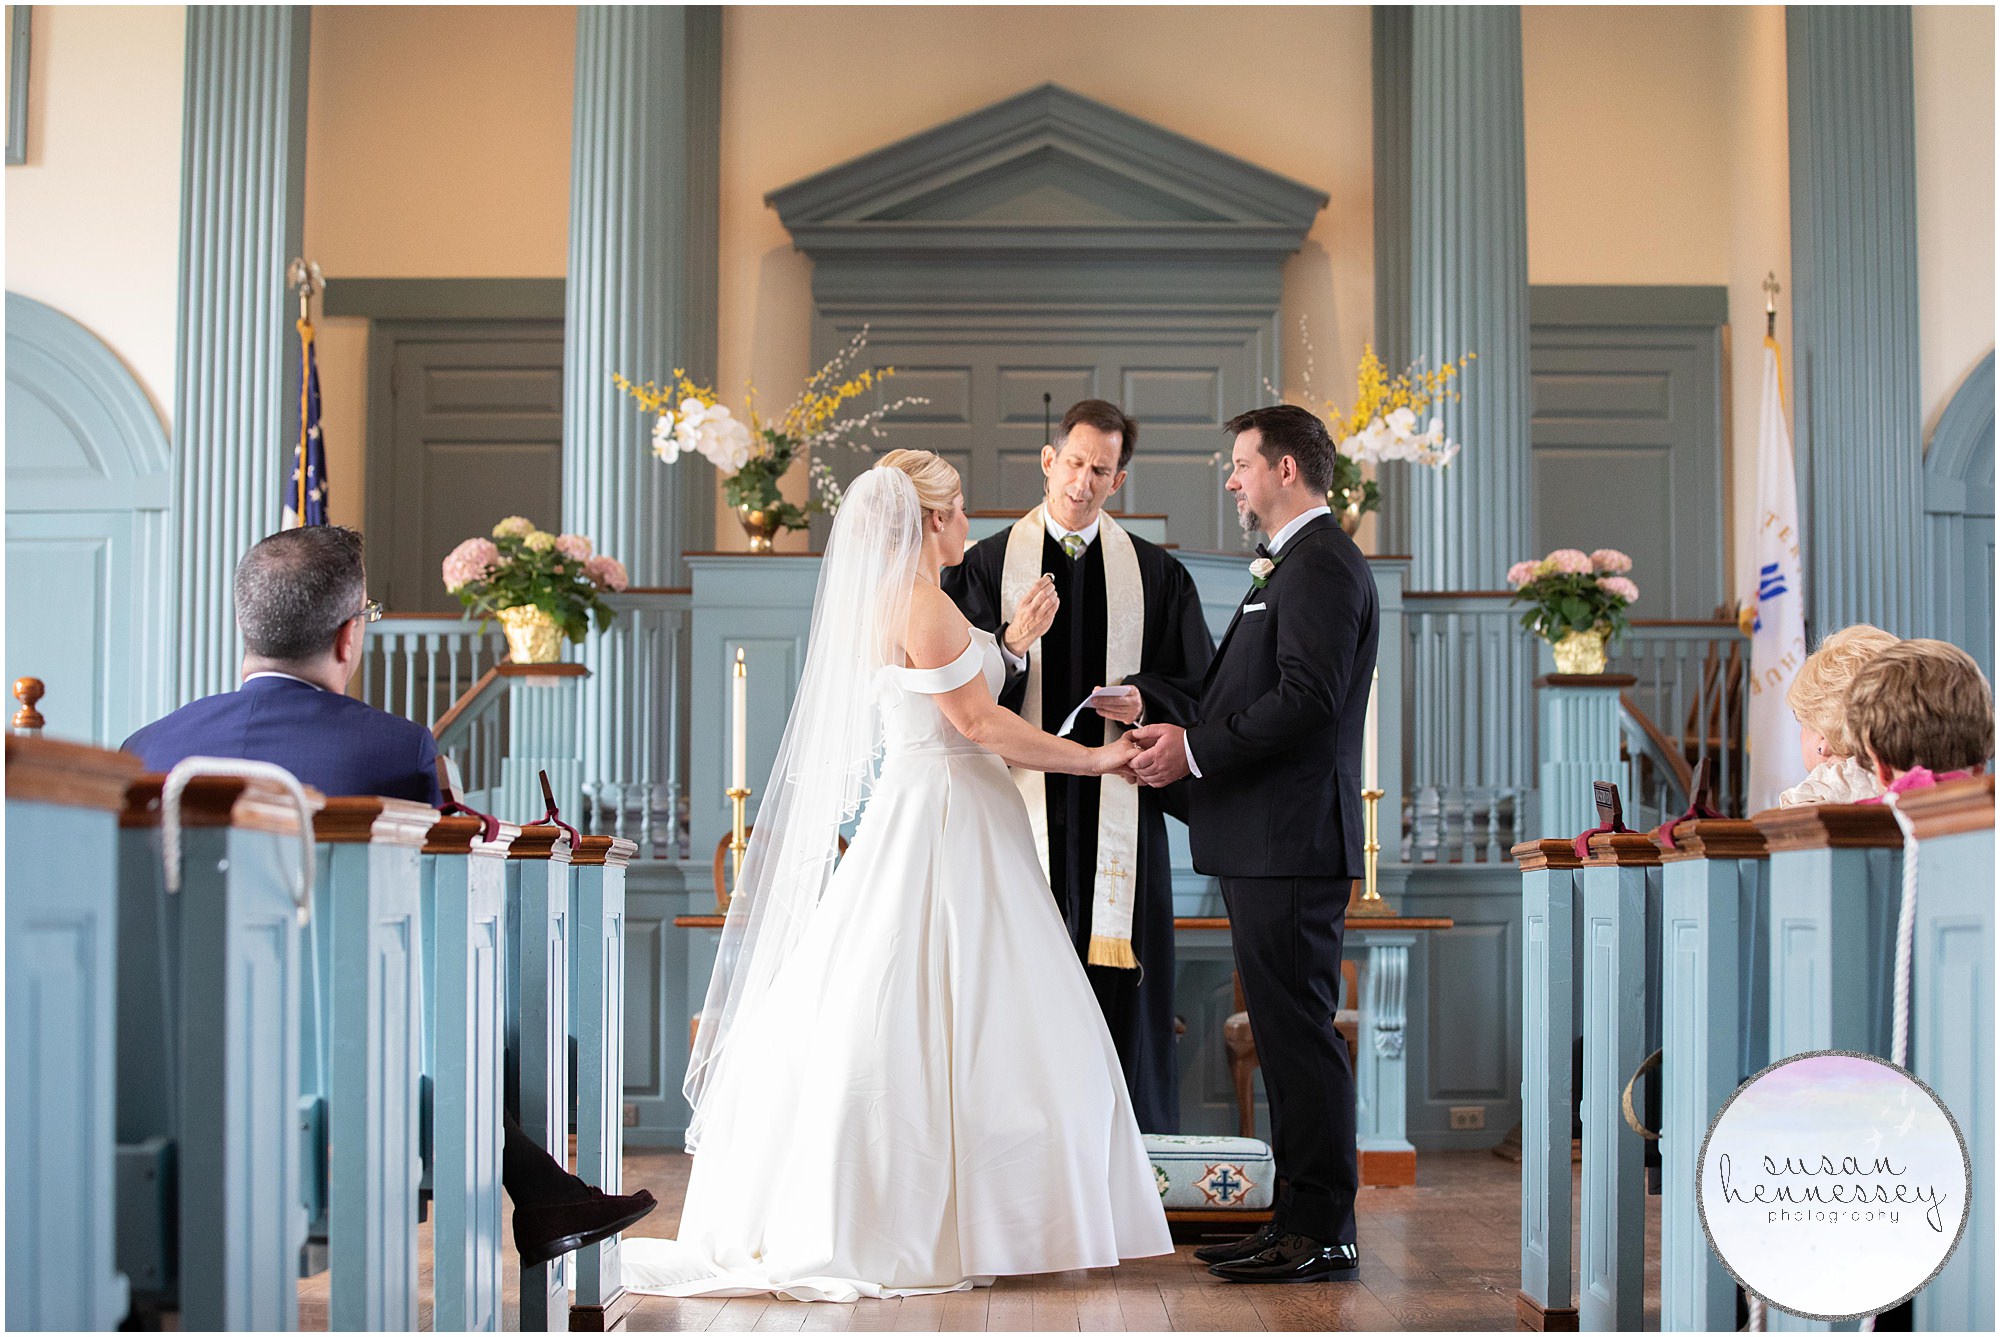 Planning a Micro Wedding? The First Presbyterian Church of Moorestown is beautiful for a ceremony.